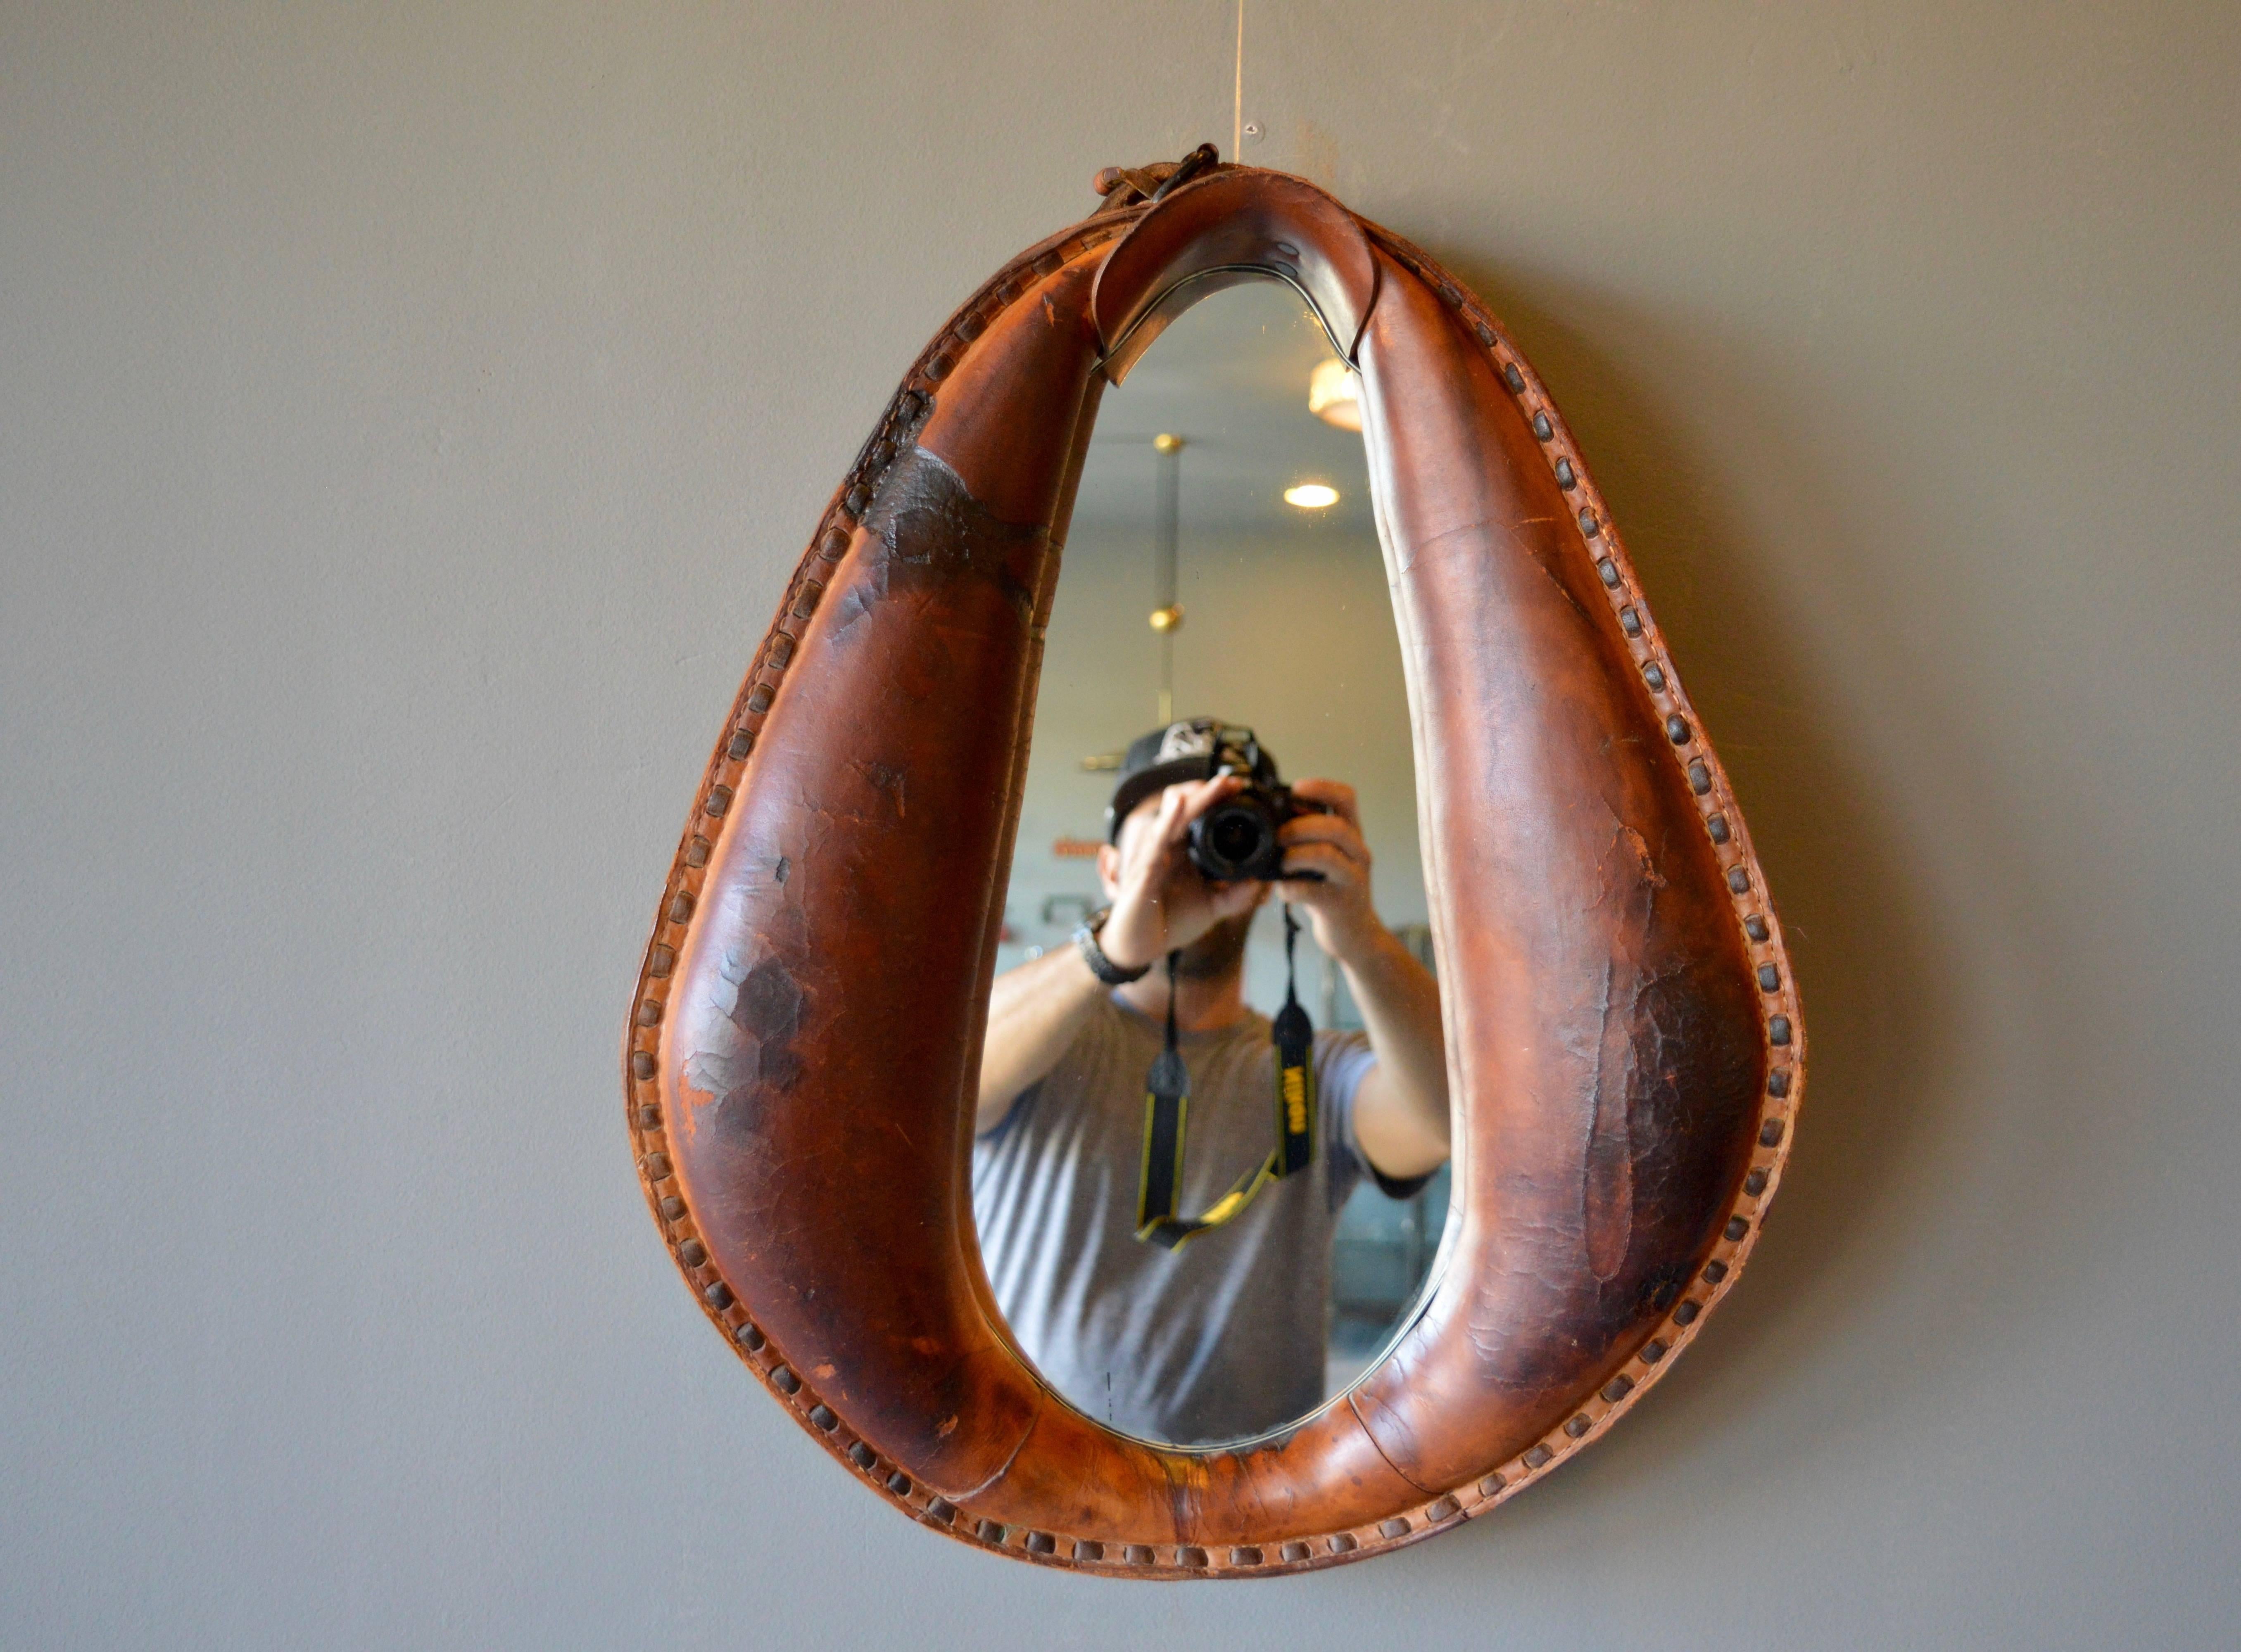 Rustic leather horse harness with custom inset mirror. Great patina to leather. Unique piece of wall-art and mirror. Excellent vintage condition.